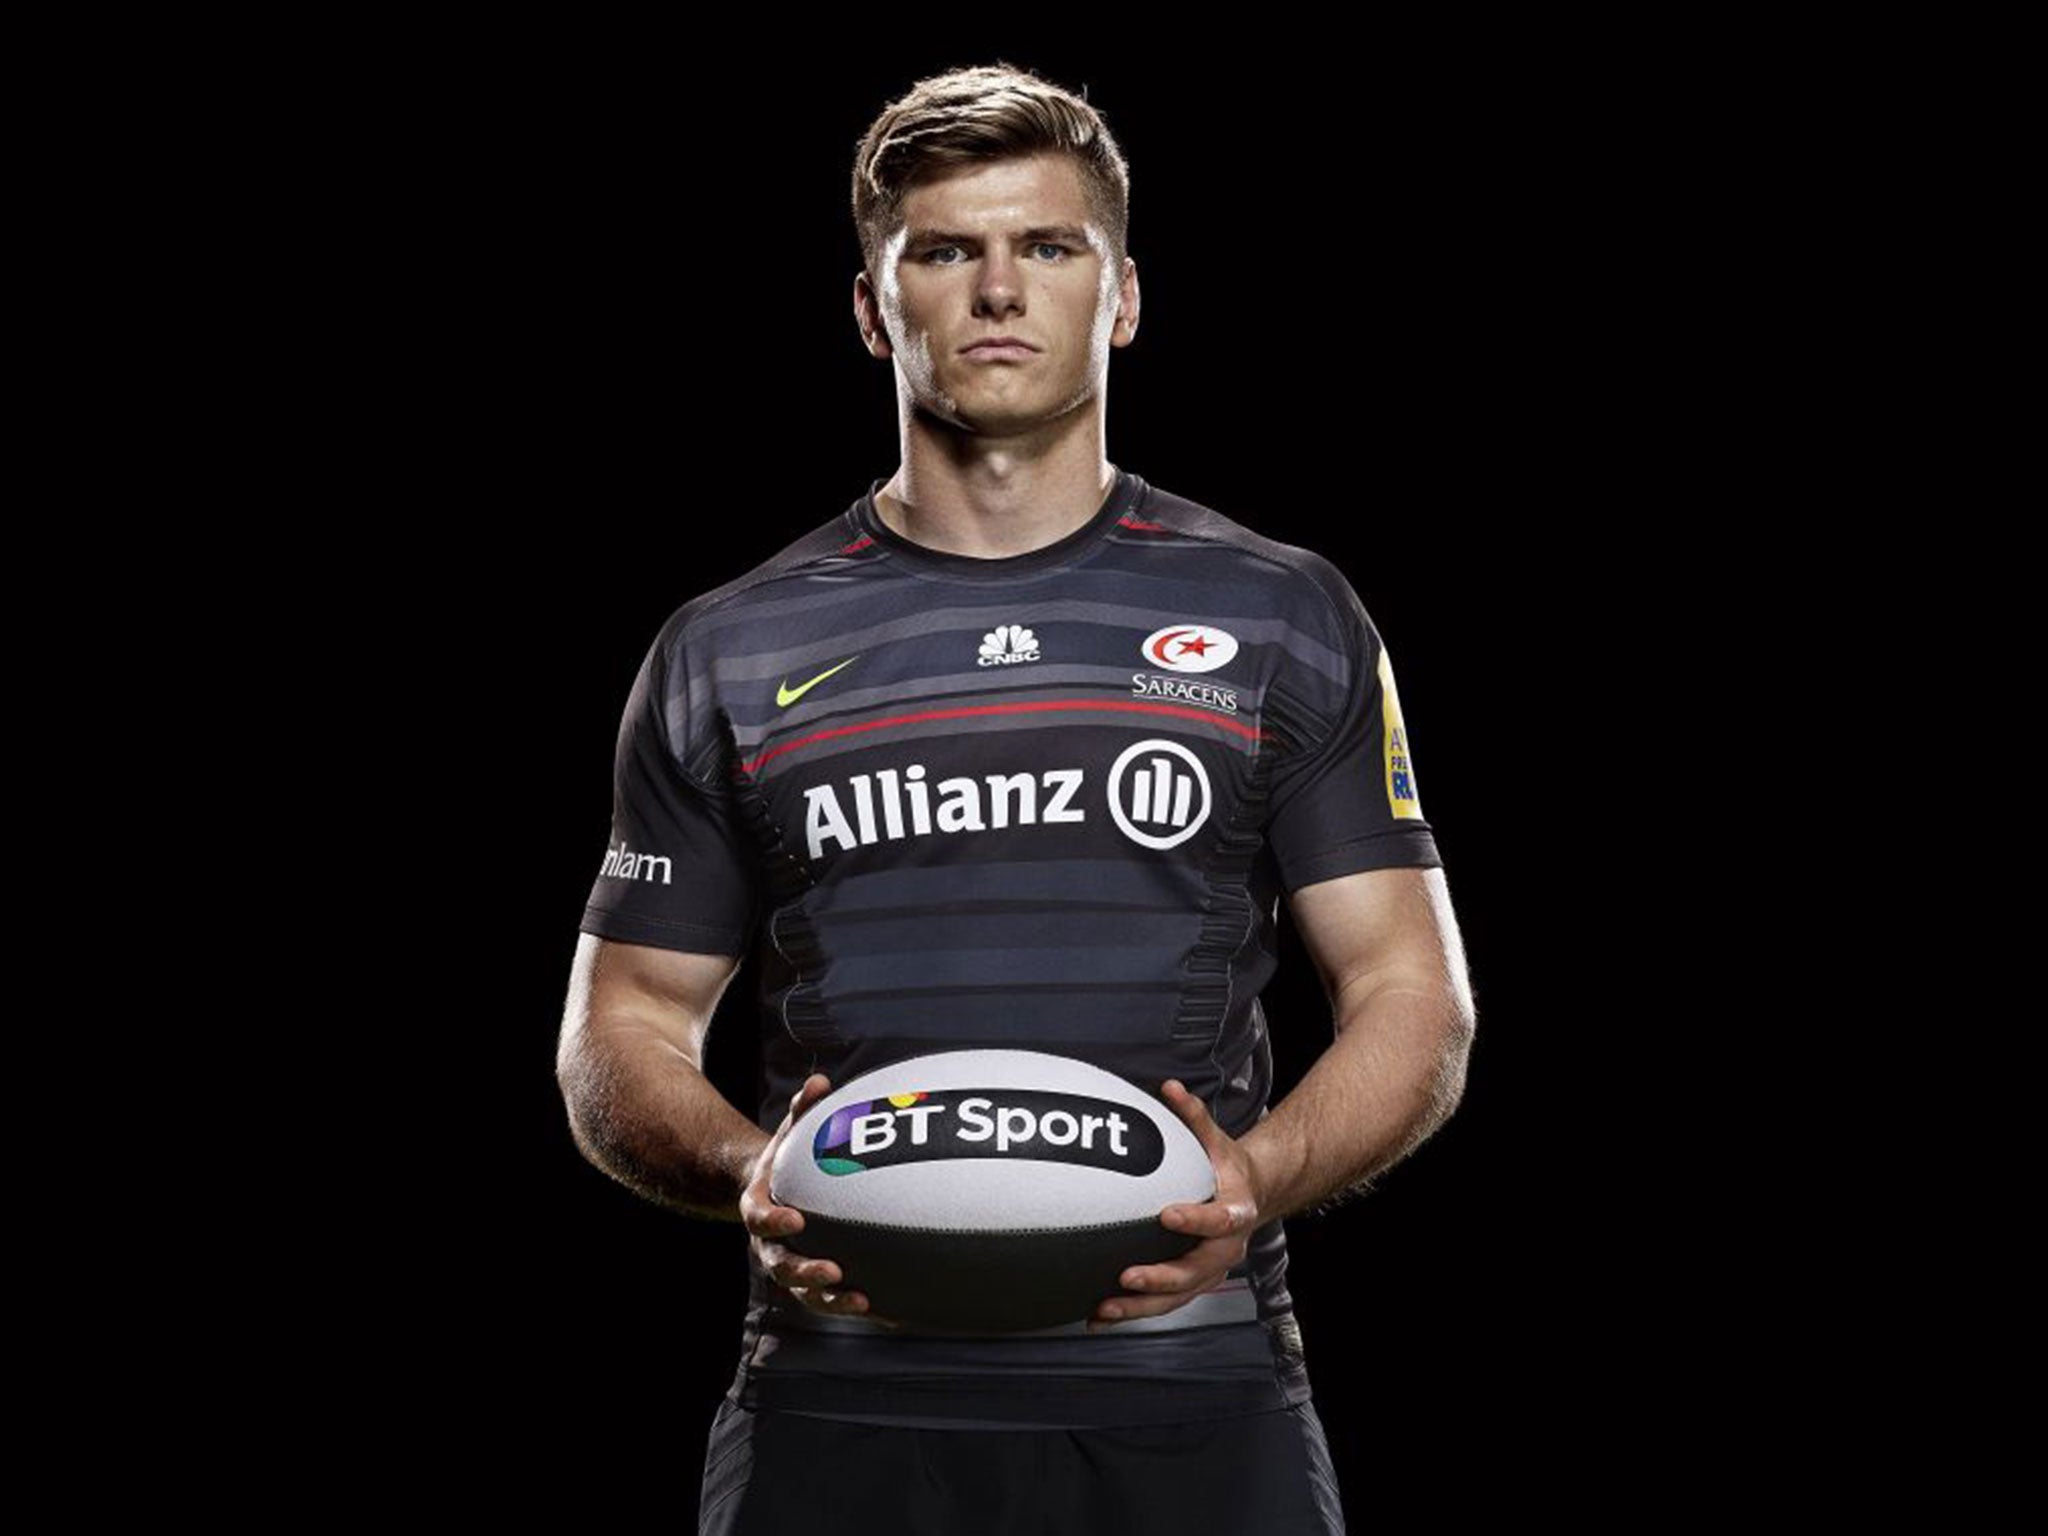 Owen Farrell, the Saracens and England fly-half, is regaining fitness and relishing the new season